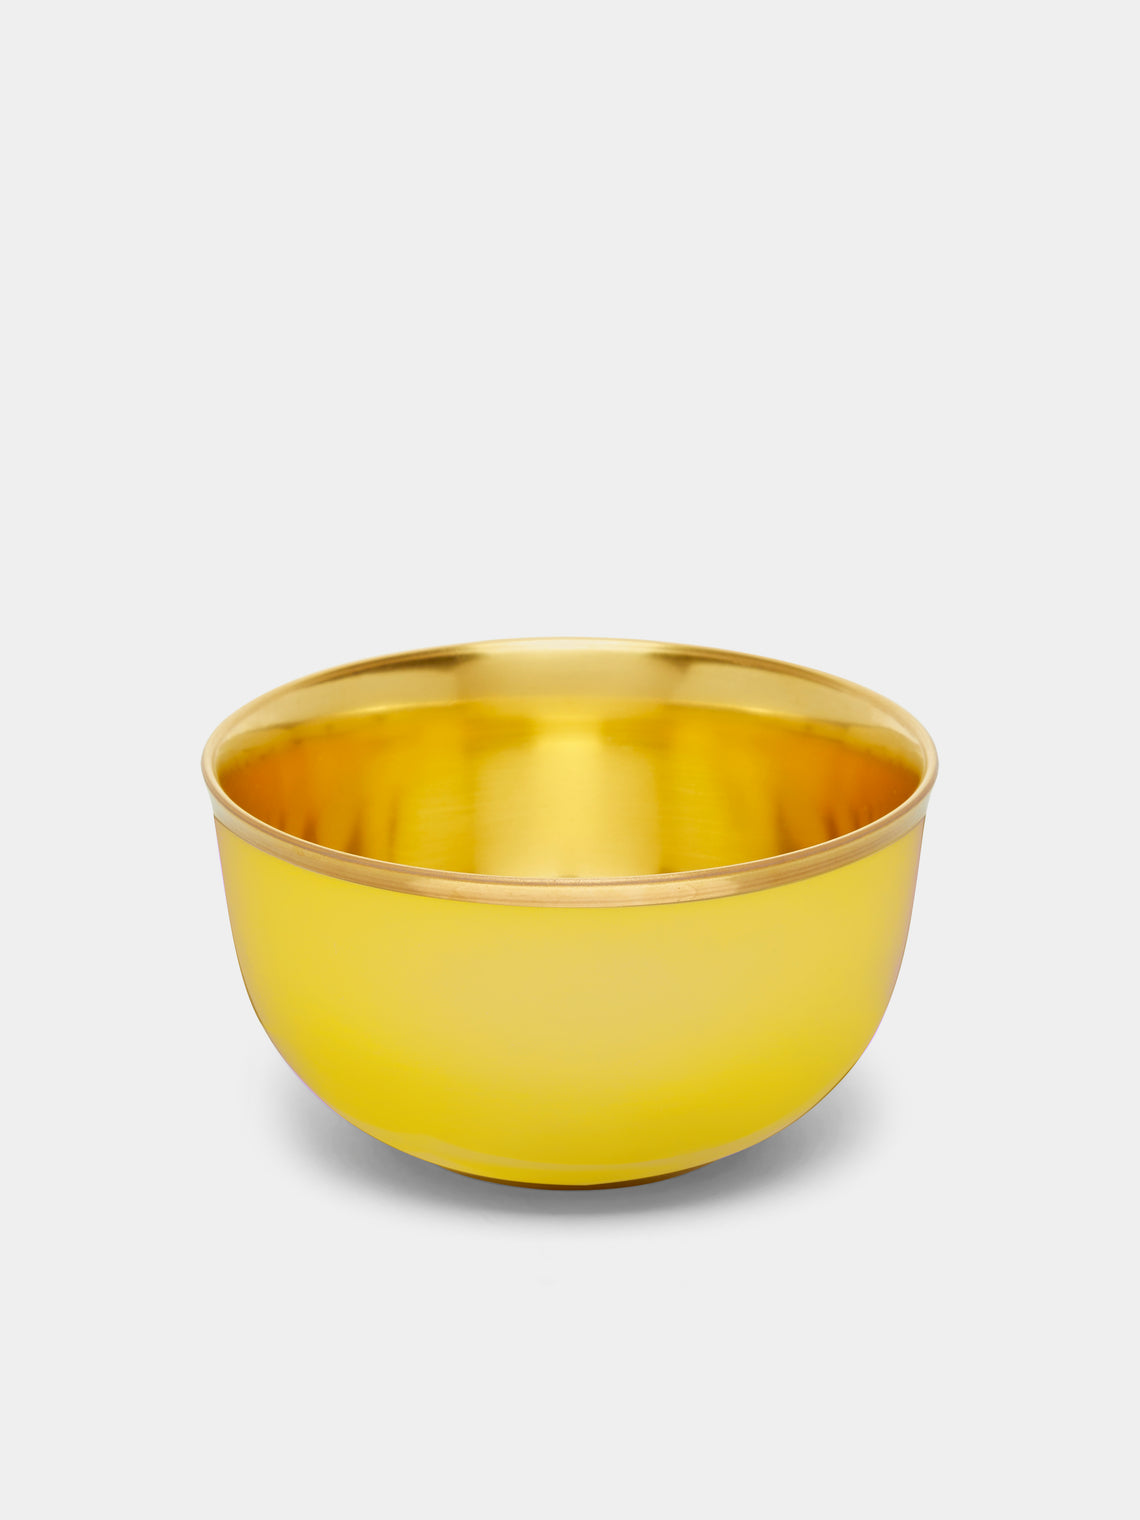 Augarten - Hand-Painted Porcelain Champagne Coupe - Yellow - ABASK - 